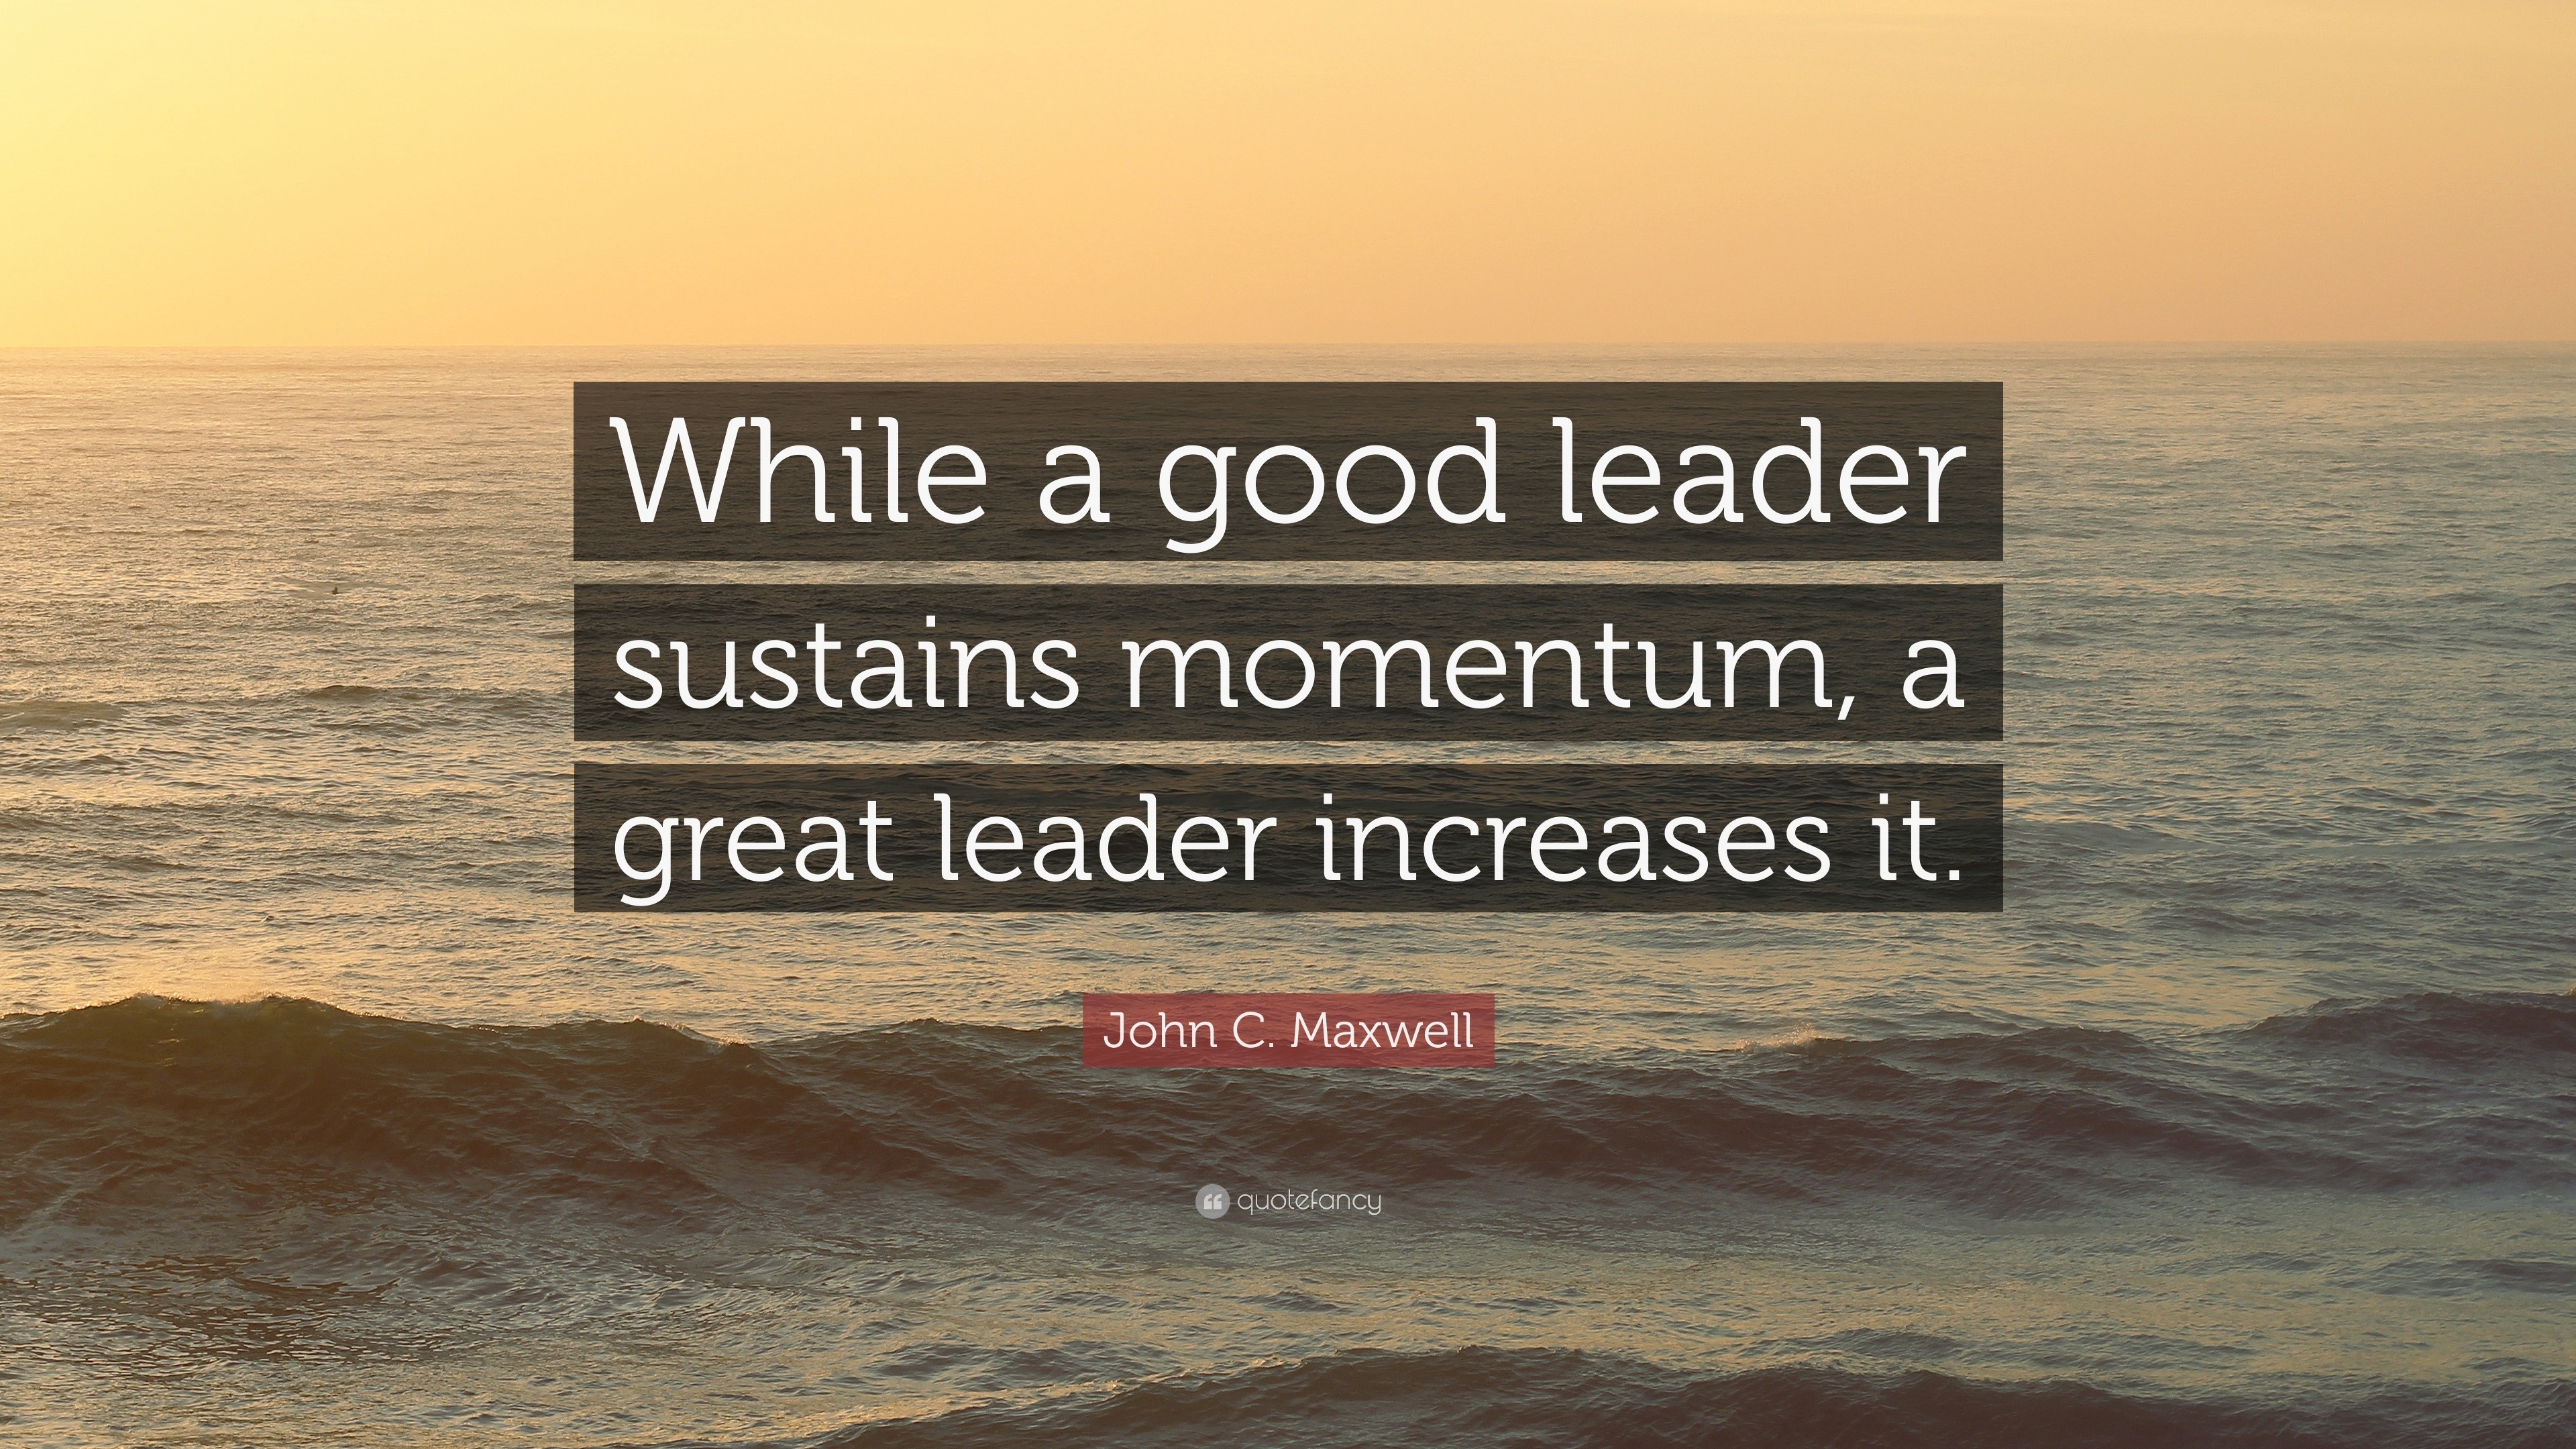 Quotes On Great Leadership at Best Quotes